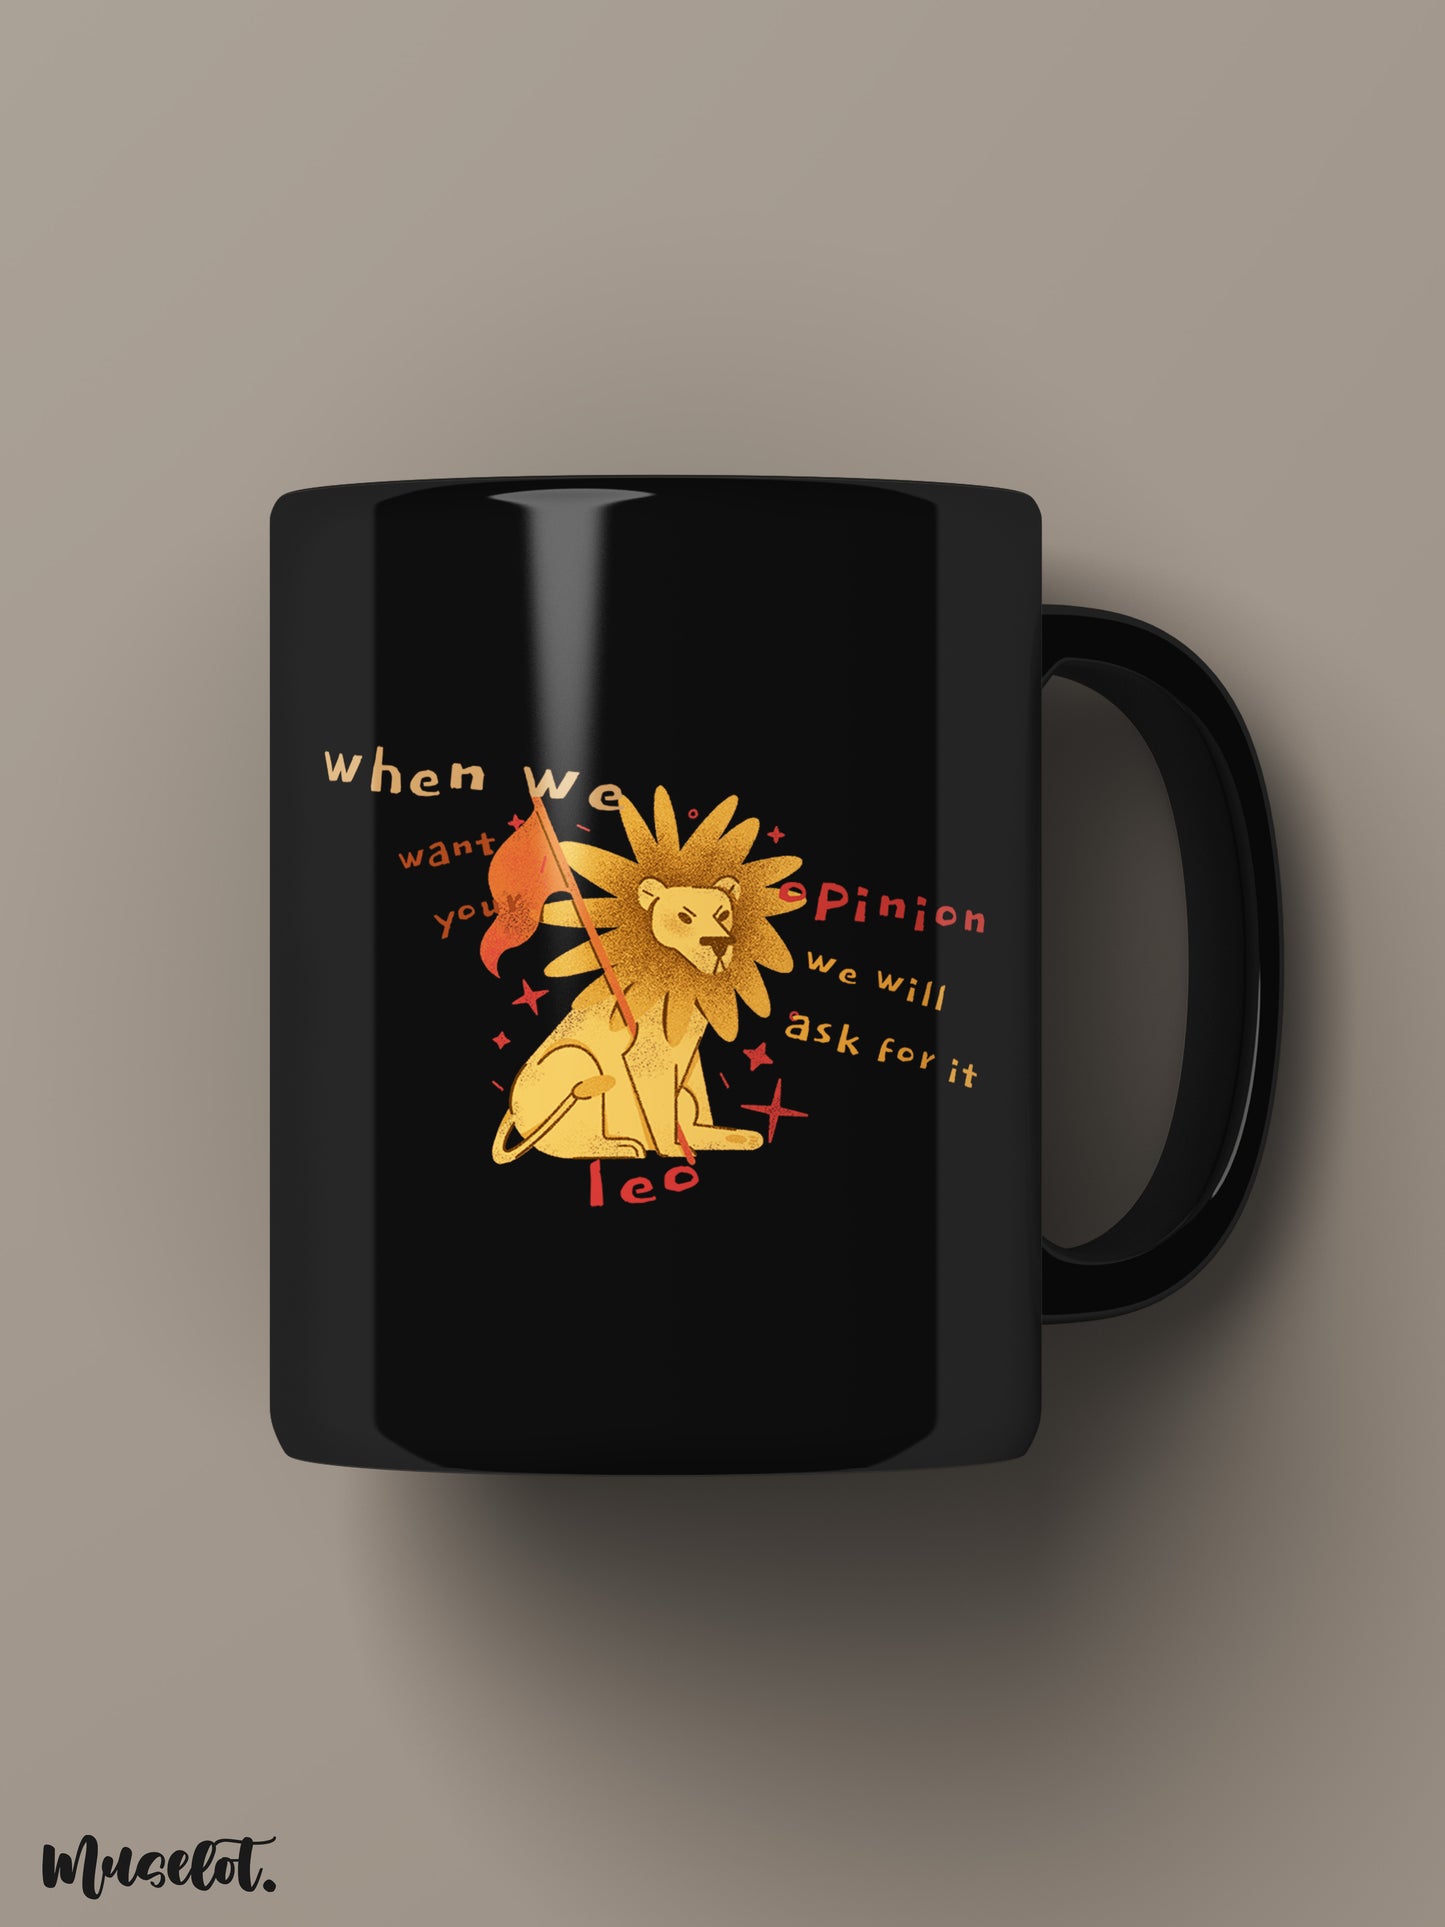 The confident leo printed black mugs online illustrated with a lion and the slang that says "When we need your opinion, we will ask for it"- Muselot